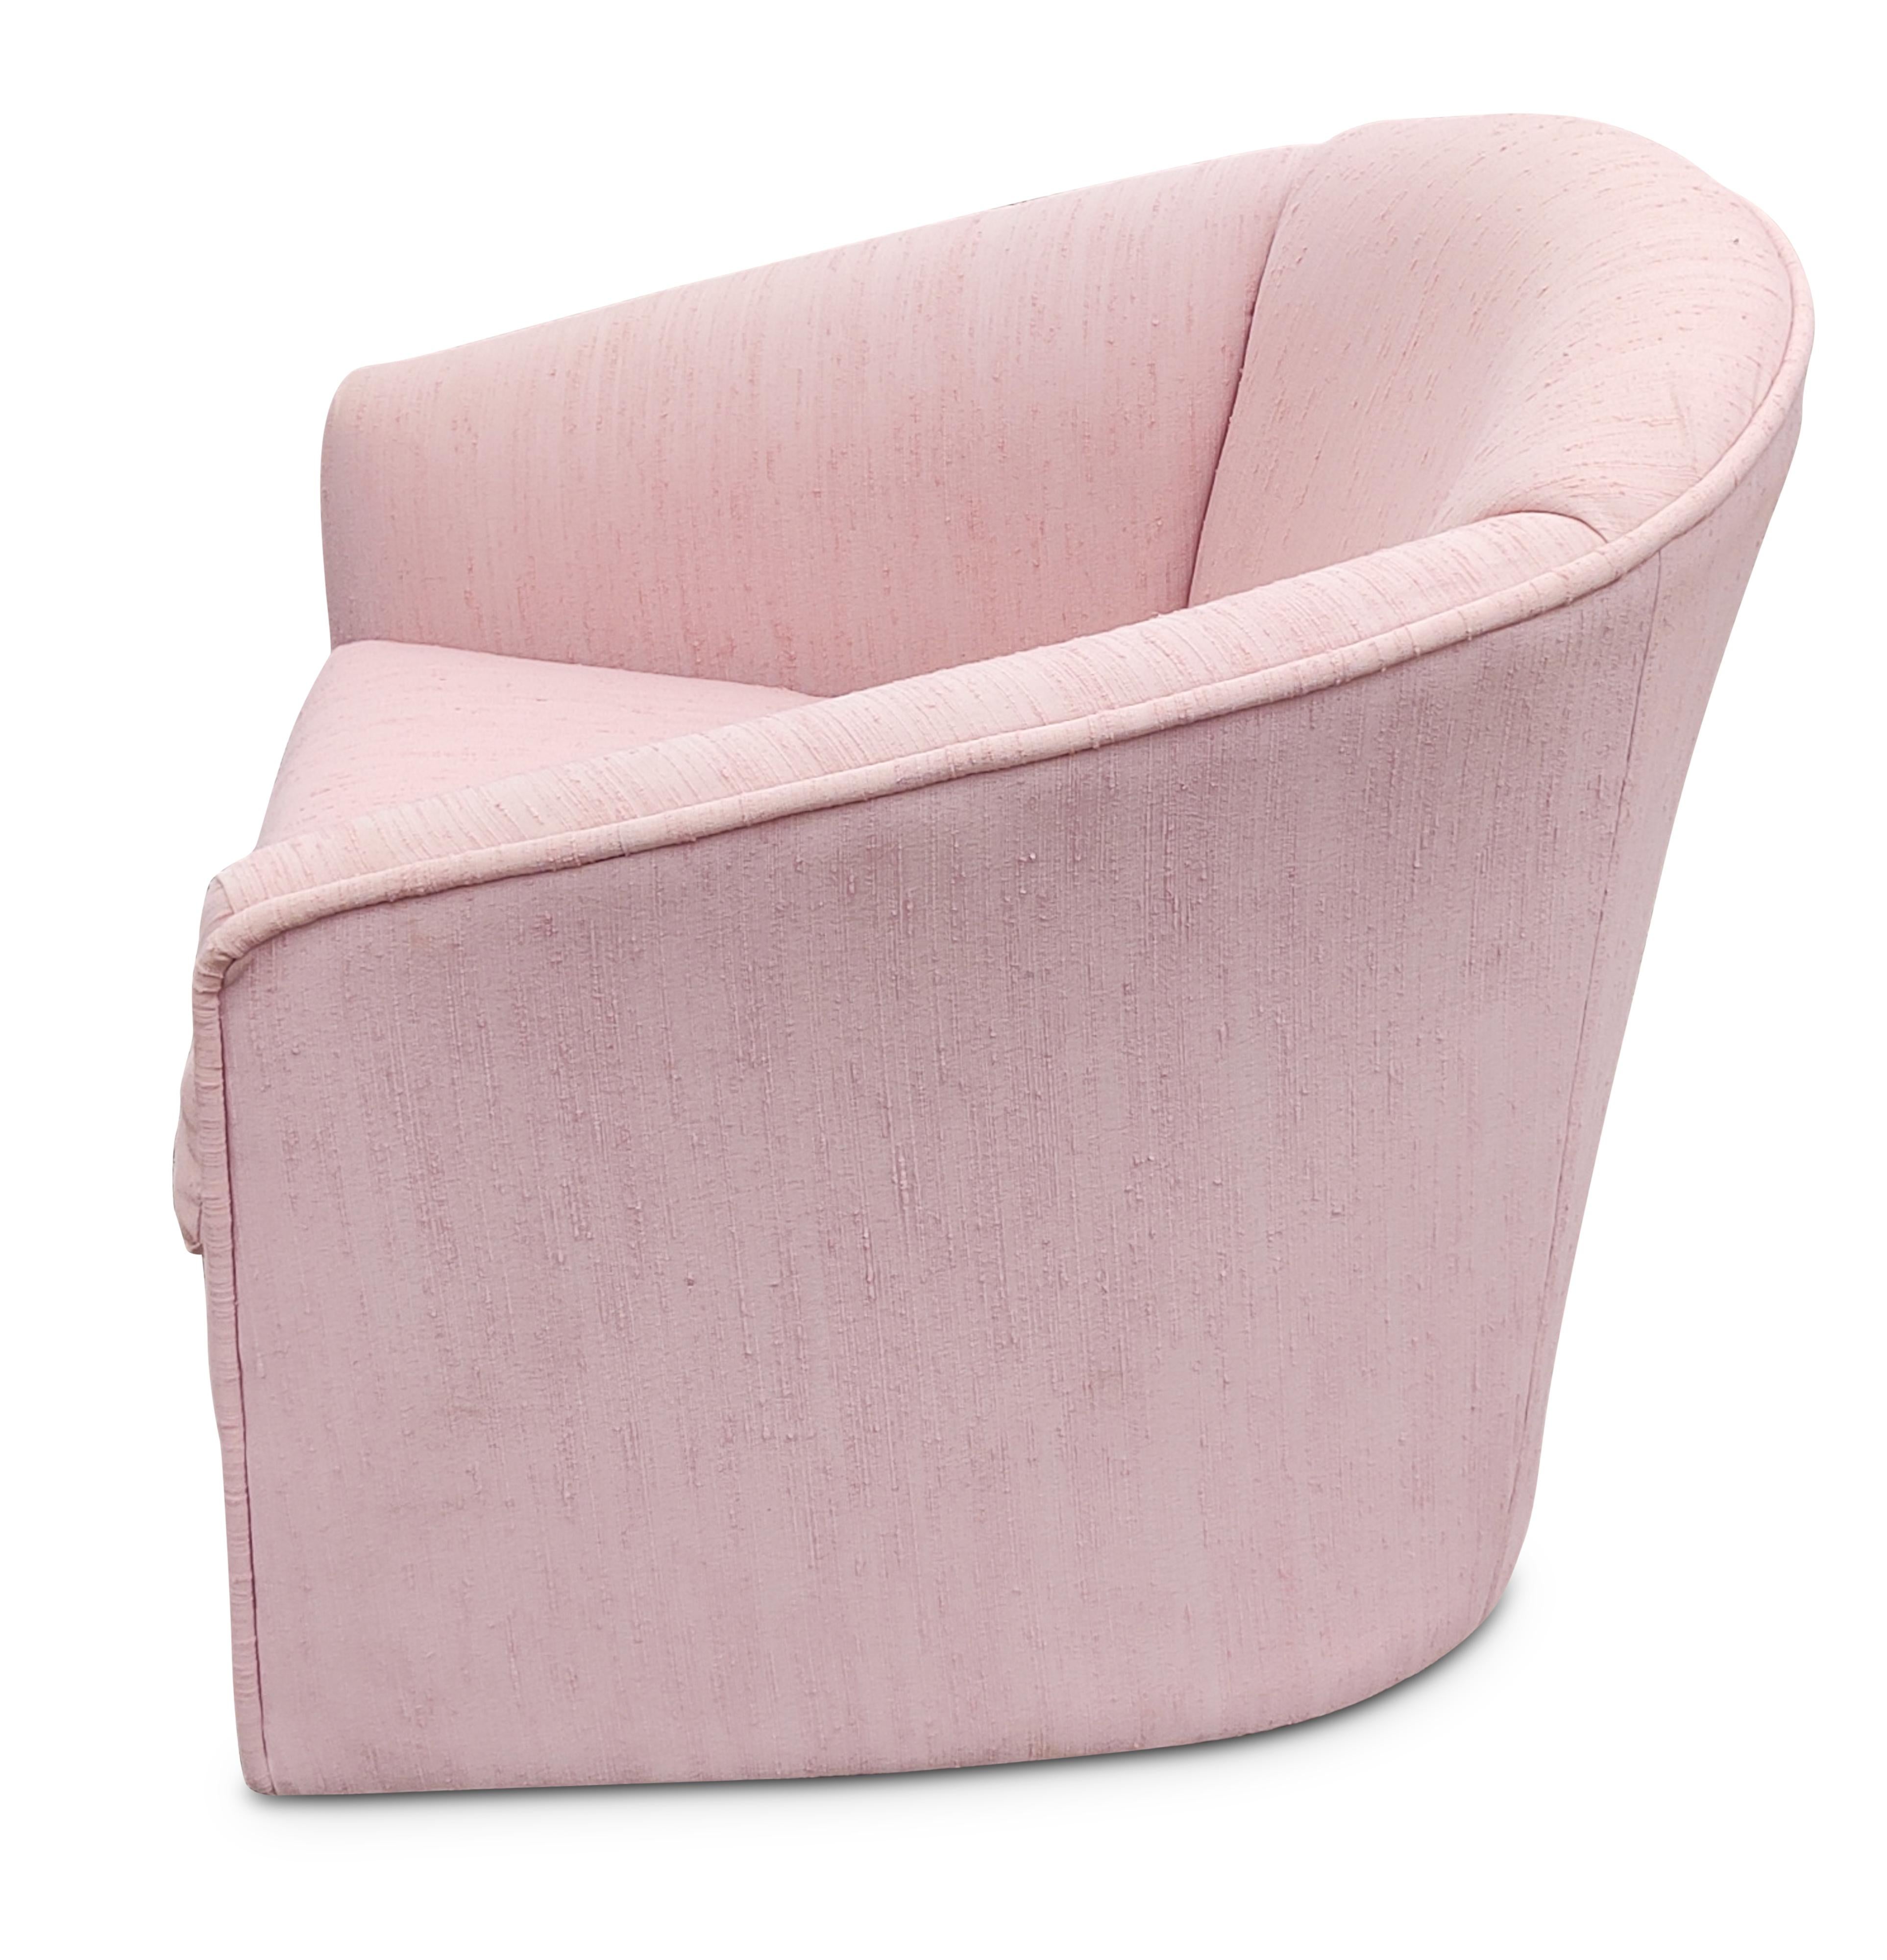 Late 20th Century Post-Modern Pair Barrel-Form Pink Upholstered Swivel Lounge Chairs 1980s